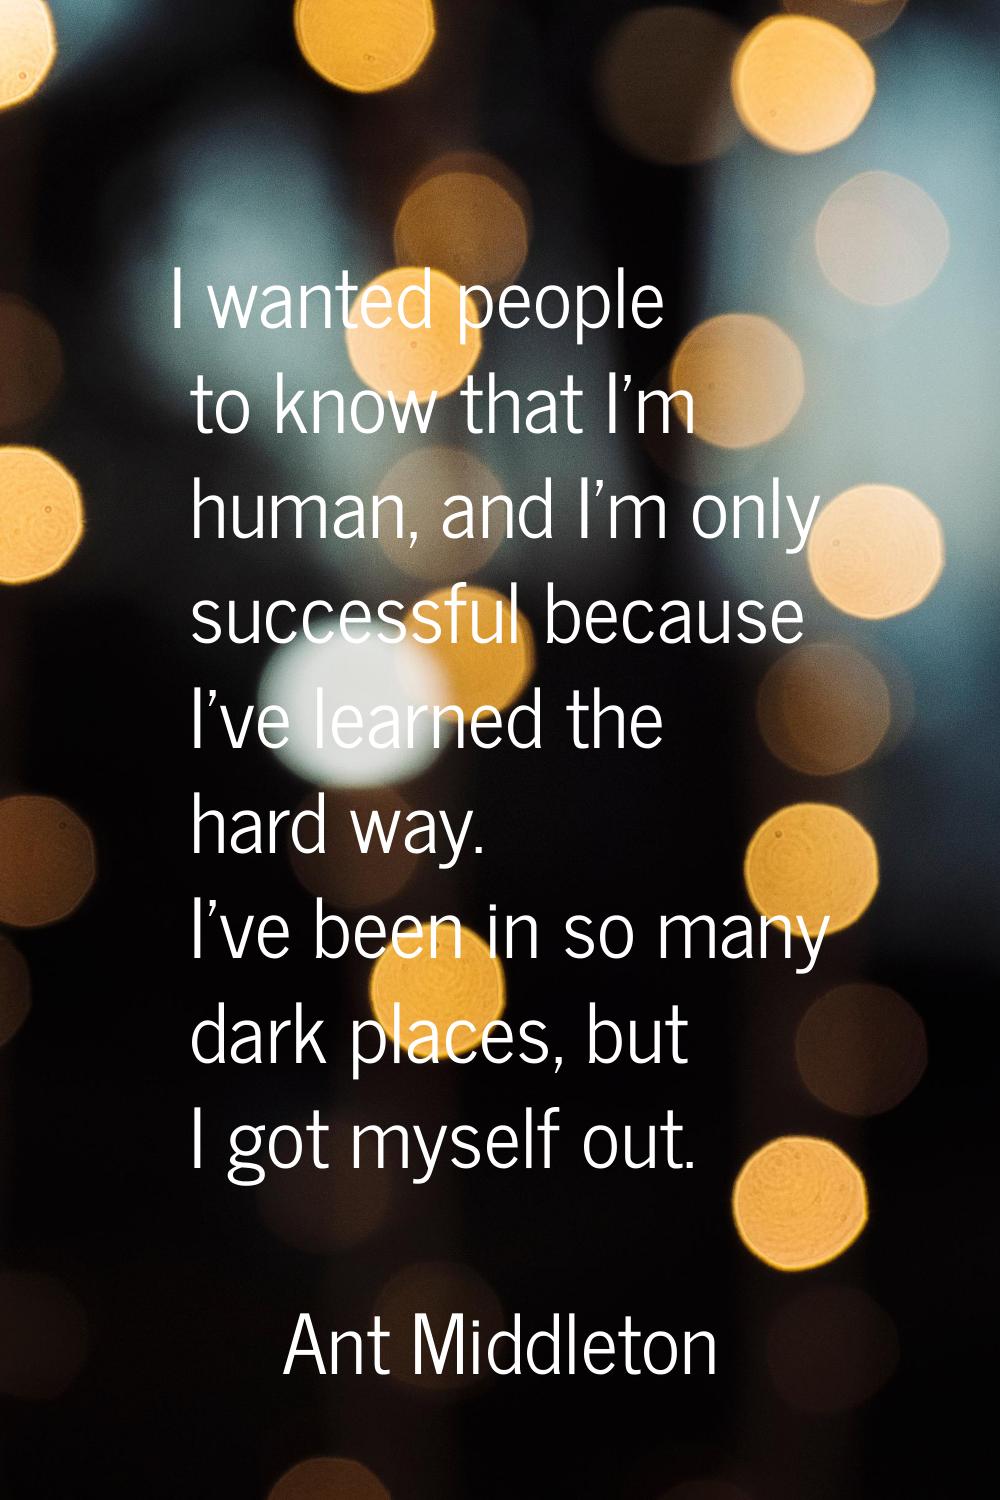 I wanted people to know that I'm human, and I'm only successful because I've learned the hard way. 